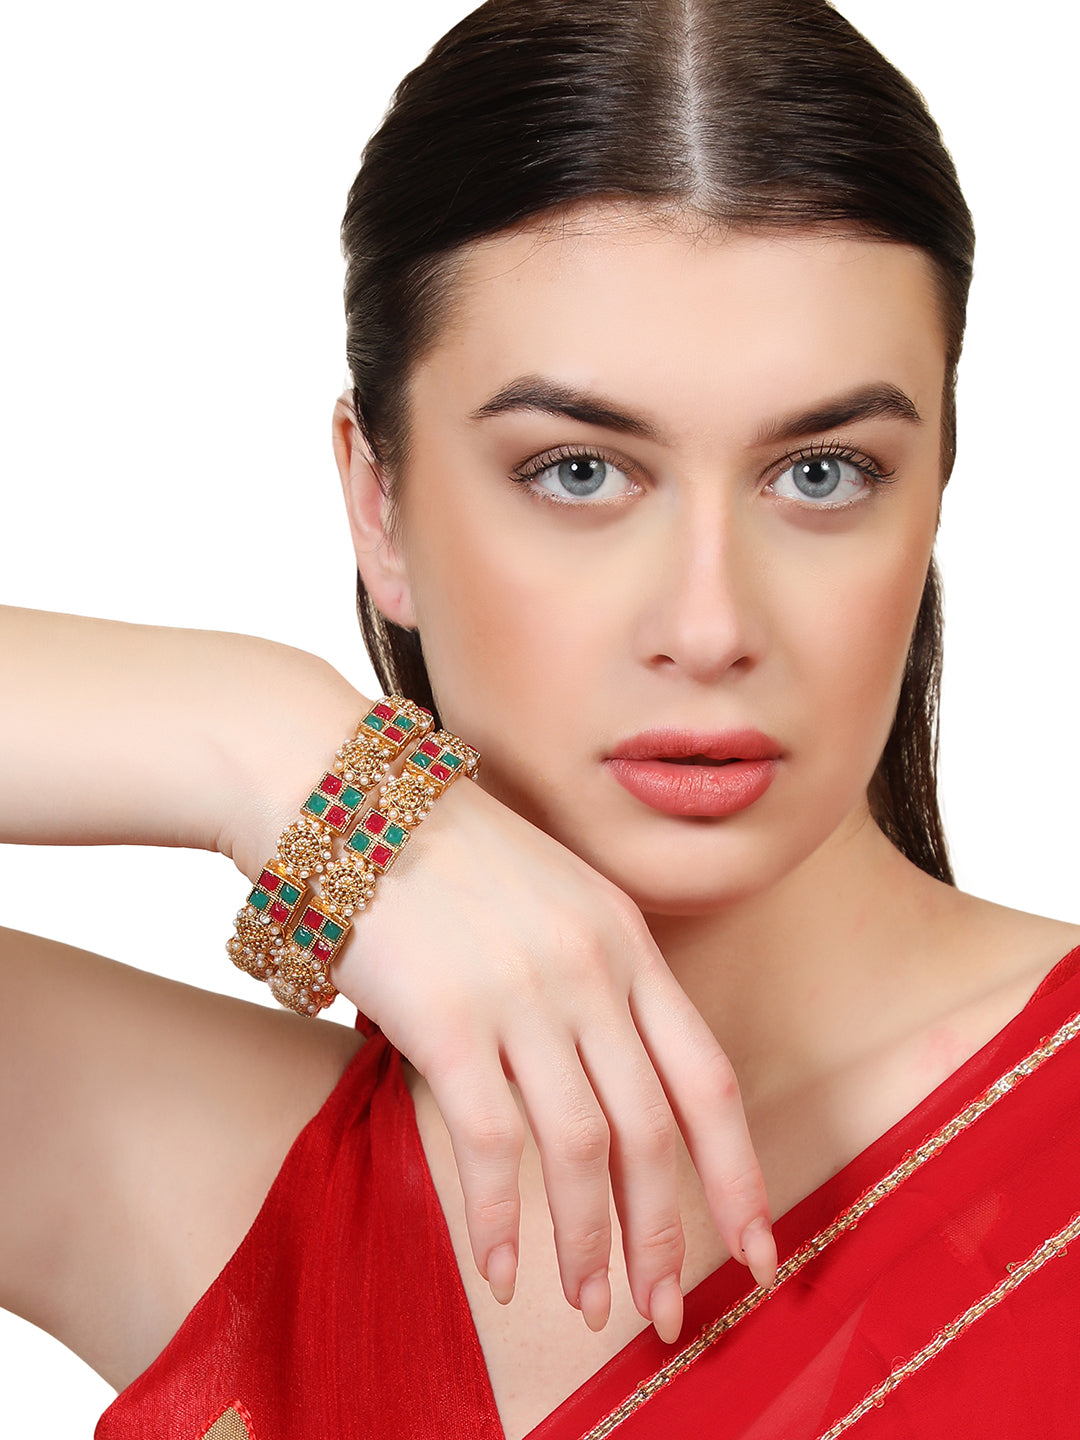 Women's Set Of Two 22K Gold-Plated Red & Green Stone Studded Square Pattern Handcrafted Bangles - Anikas Creation